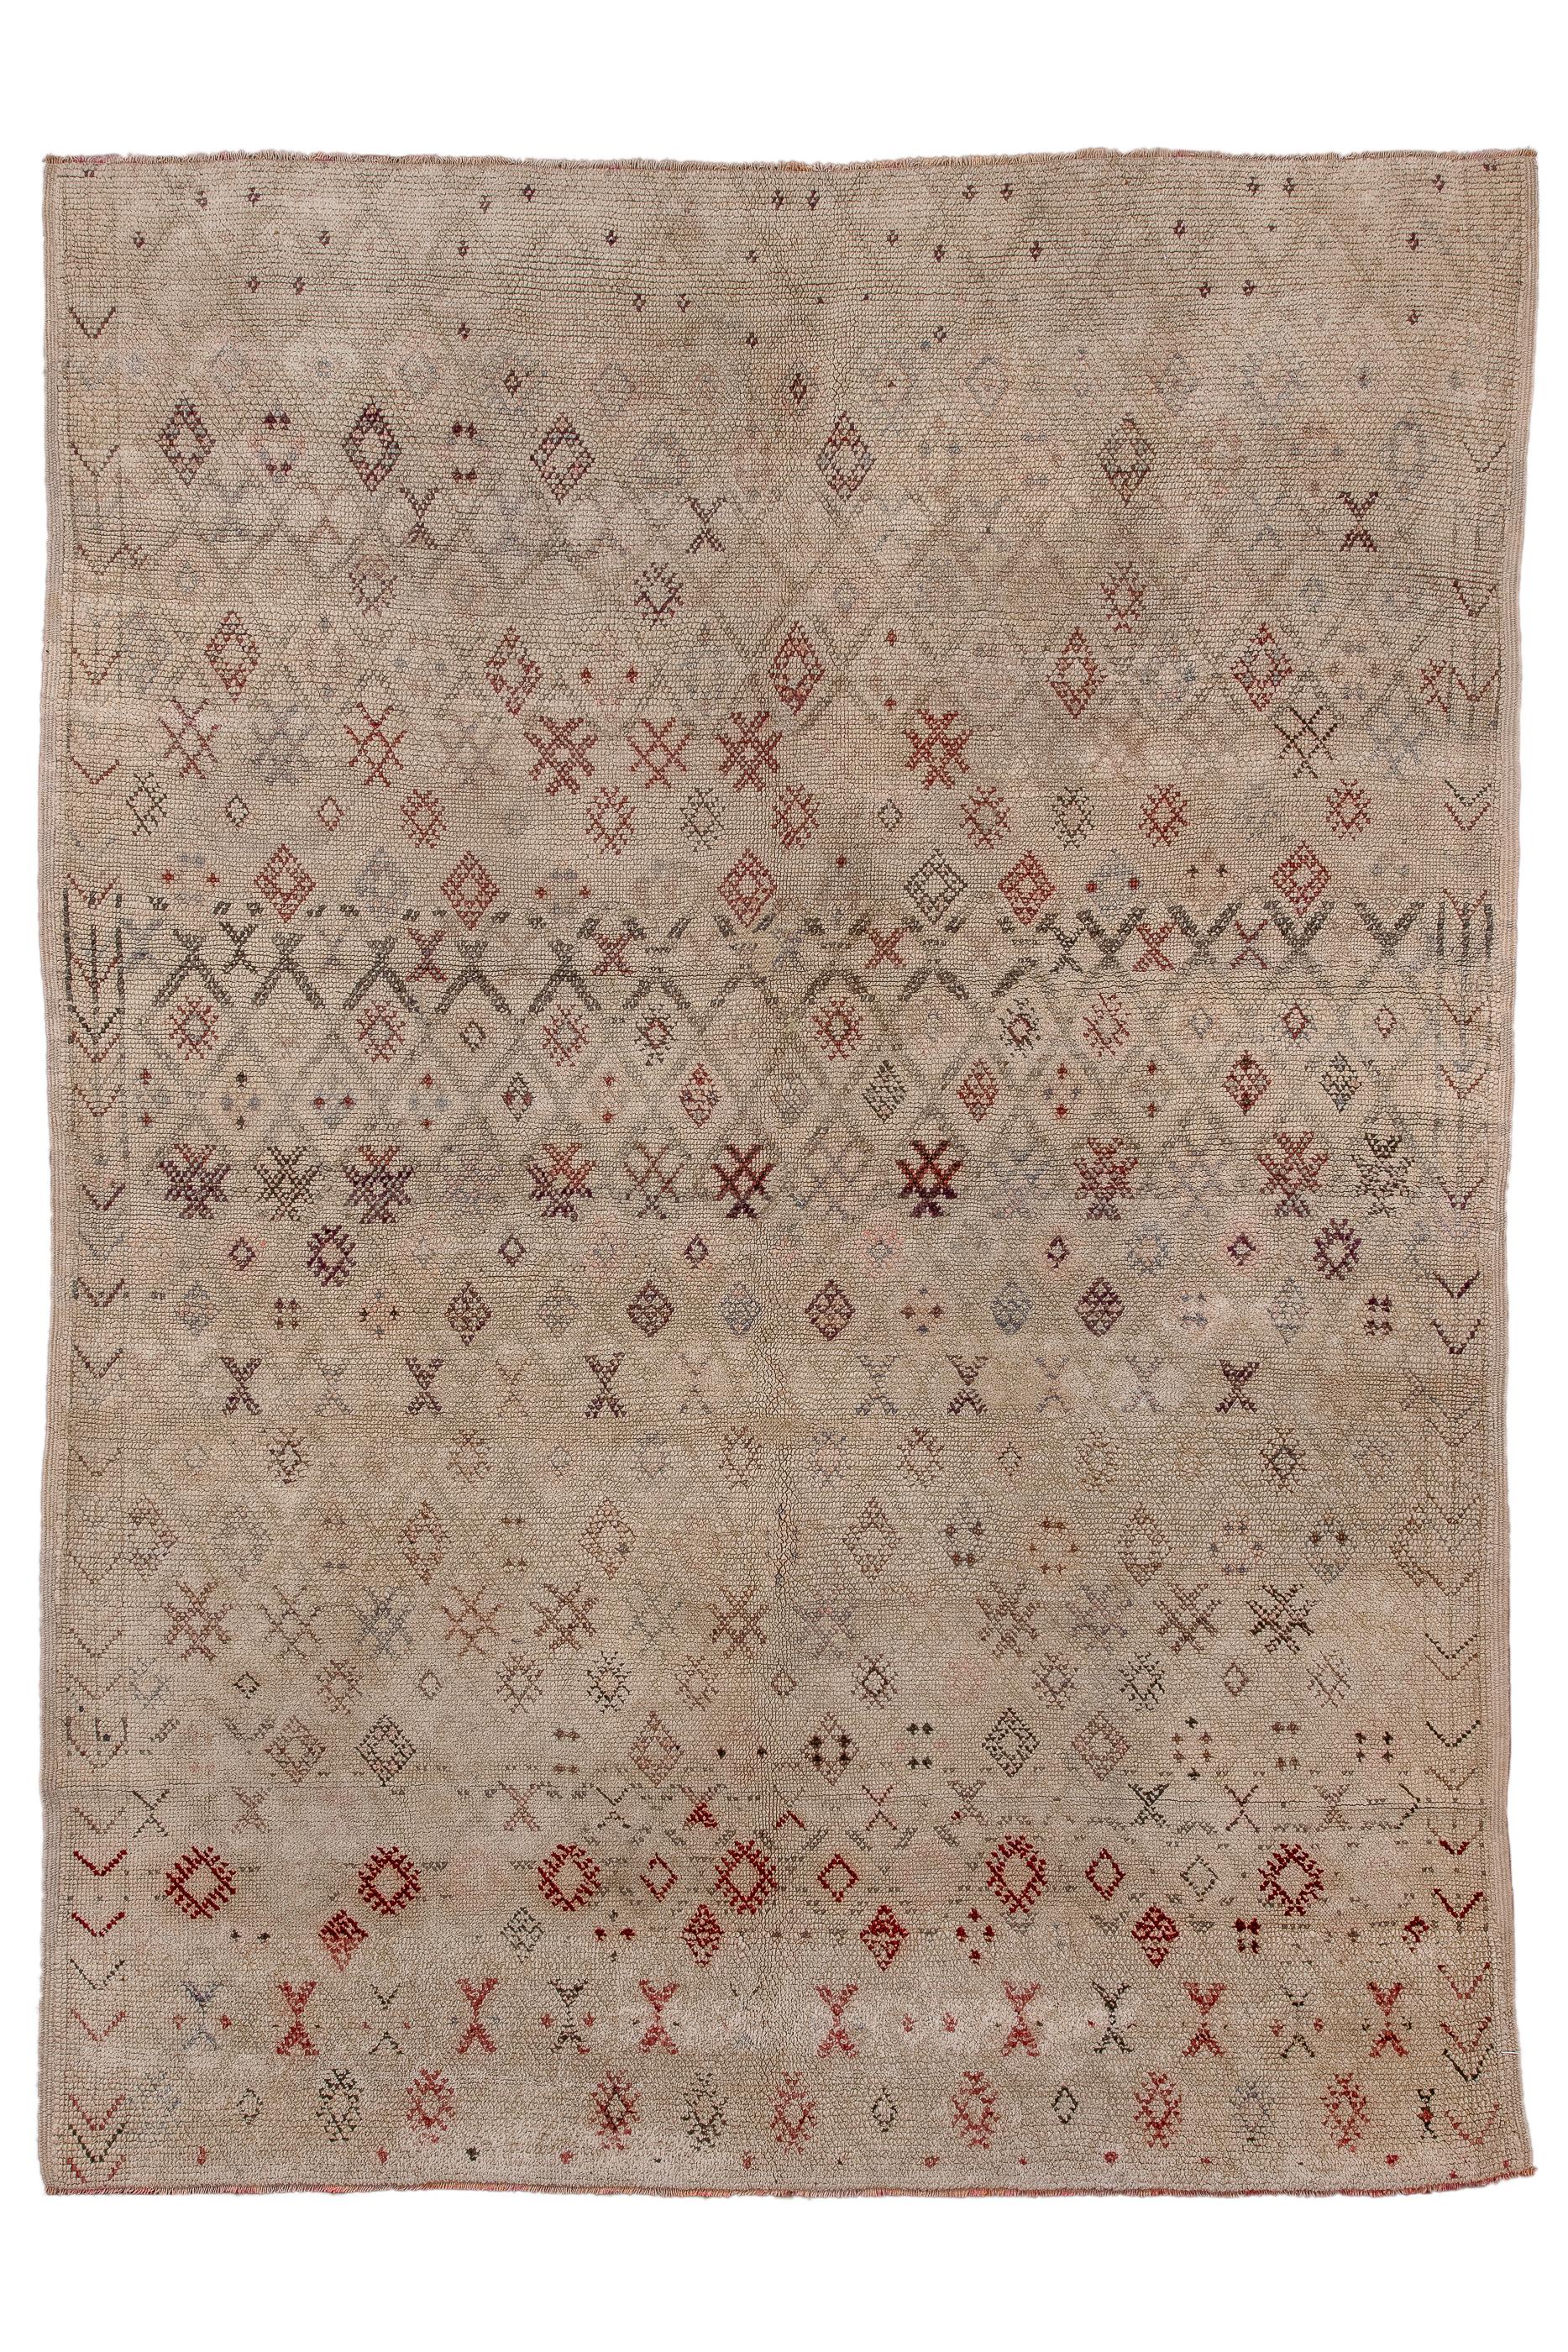 This large rustic Moroccan rug shows a tan field overlaid with a lozenge trellis allover pattern with various geometric devices, including: X’s, cross hatch tiny lozenges and small lozenges; all in shades of brown, with a few darker horizontal runs.